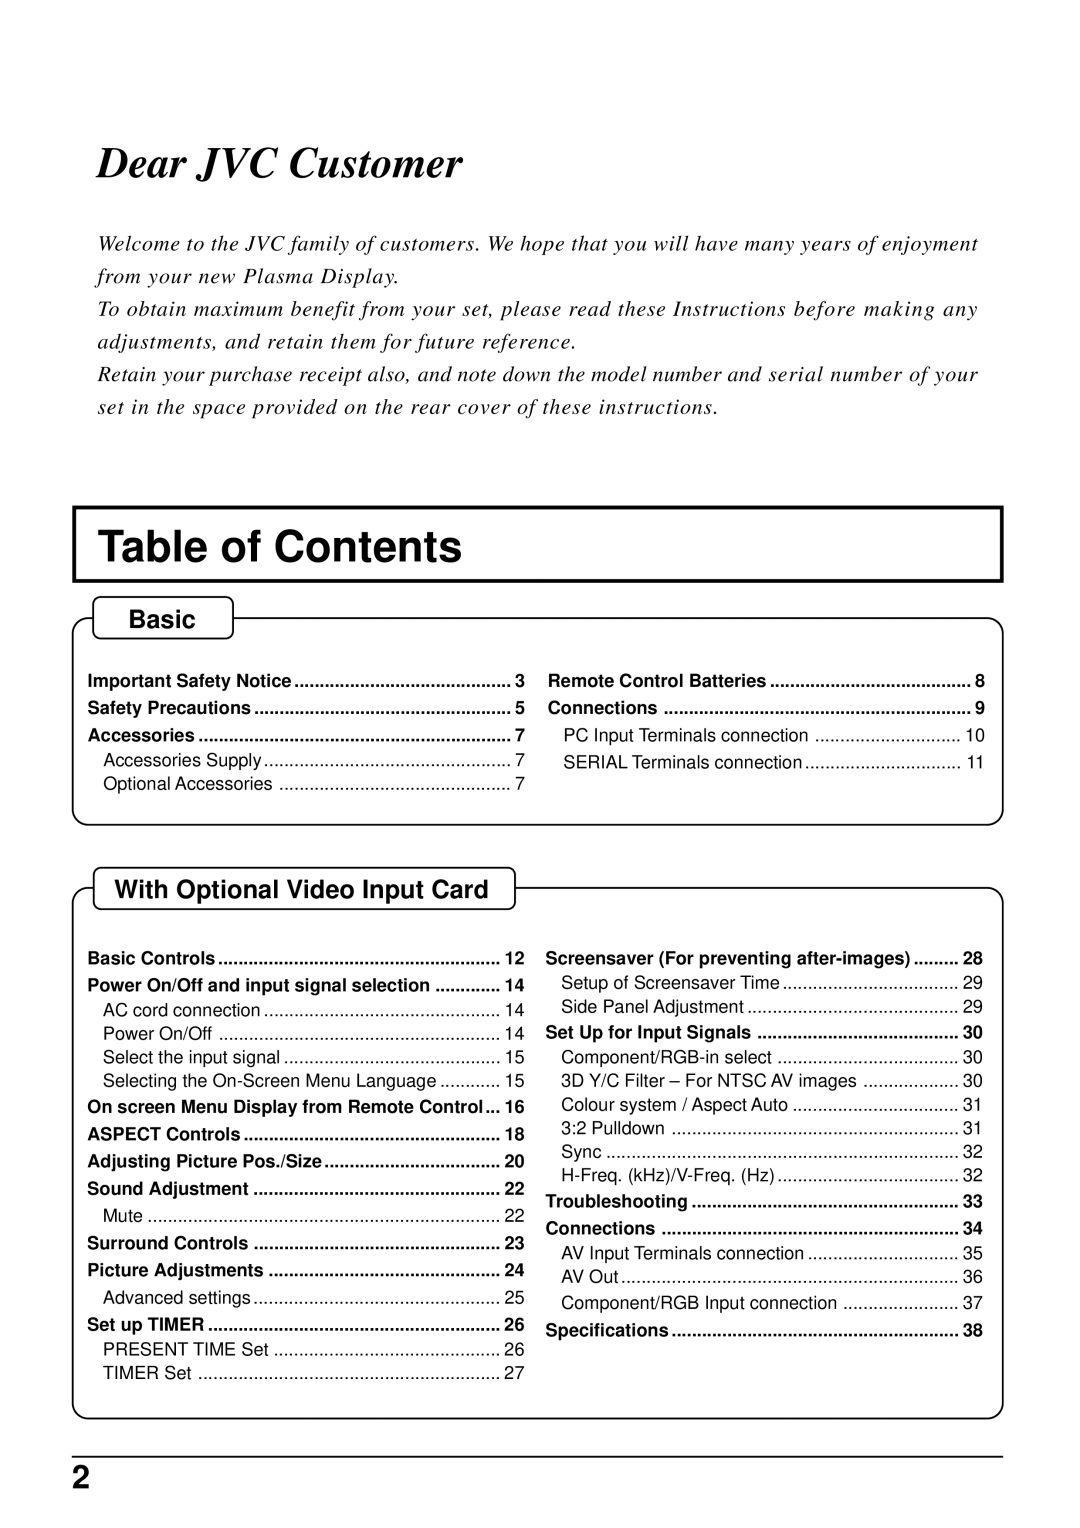 JVC GD-V501PCE manual Table of Contents, Dear JVC Customer, Basic, With Optional Video Input Card 